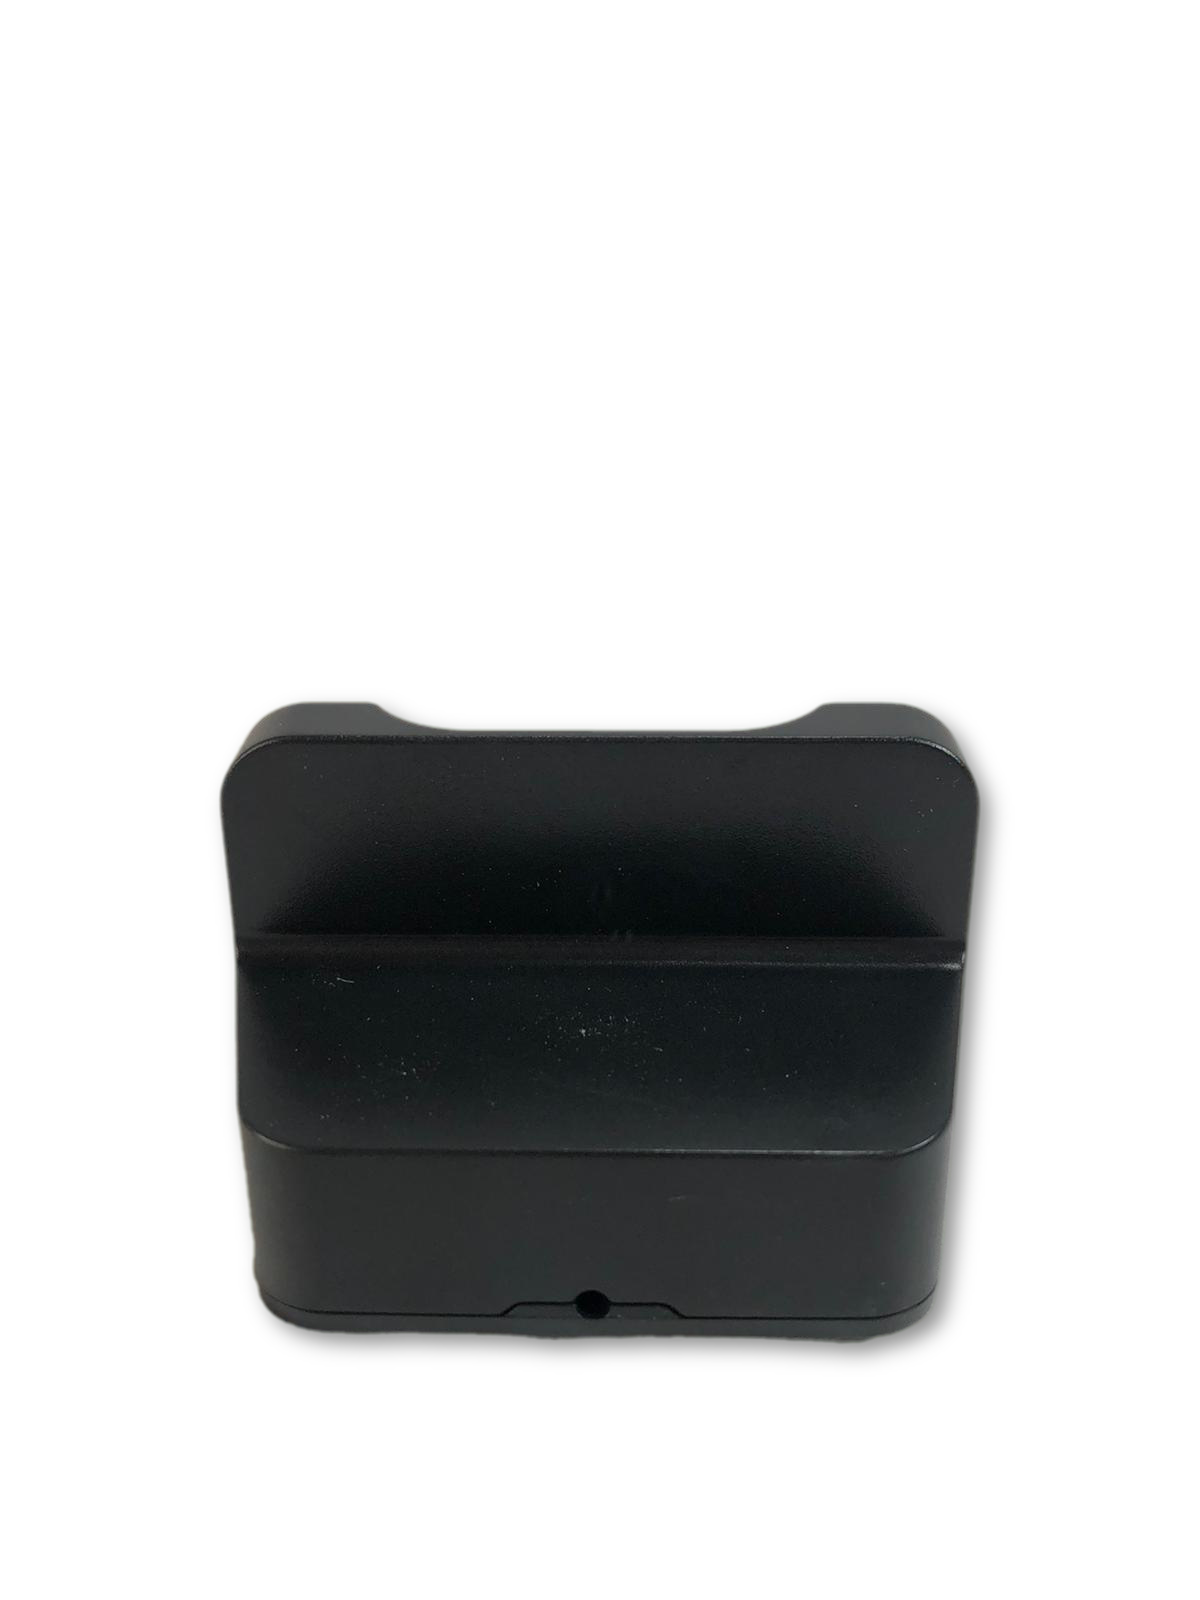 Charging Stand for Airpods & iPhone